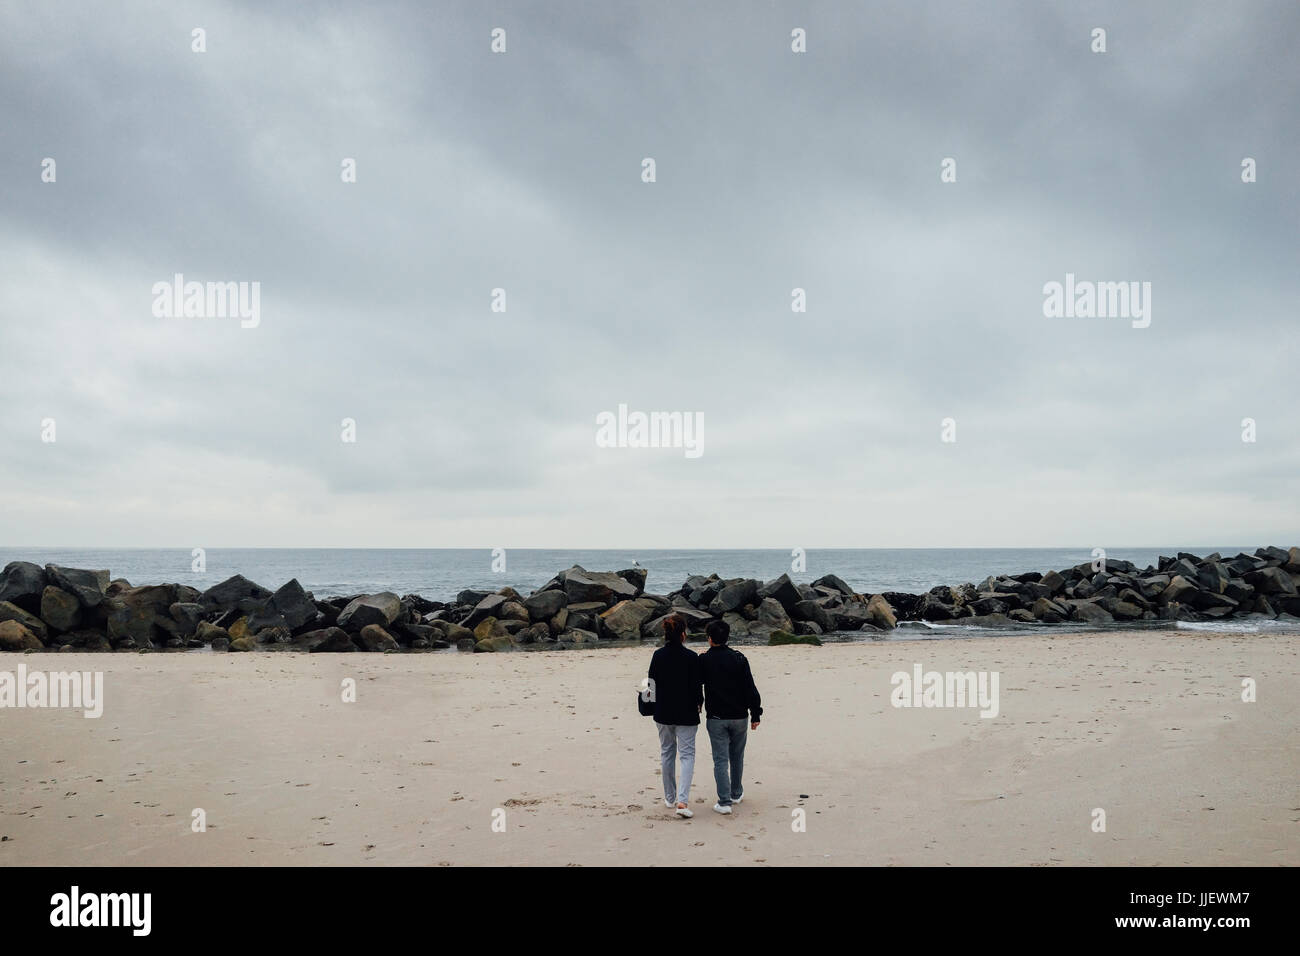 The couple stand and look out from Venice beach, California. Stock Photo